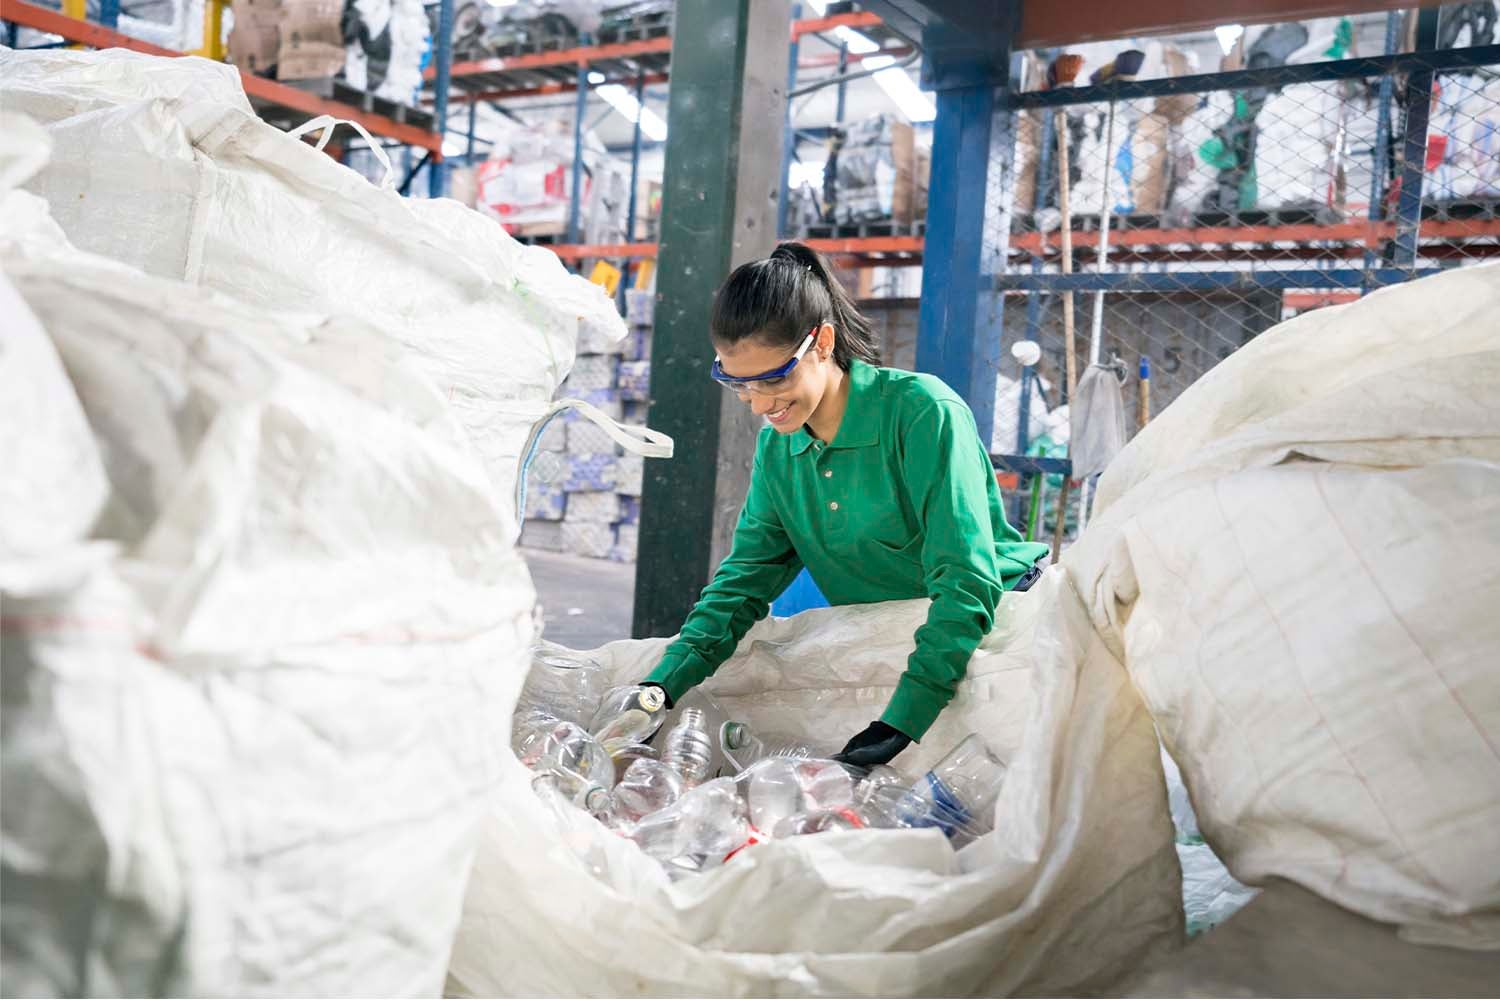 Smiling employee at a plastic recycling facility